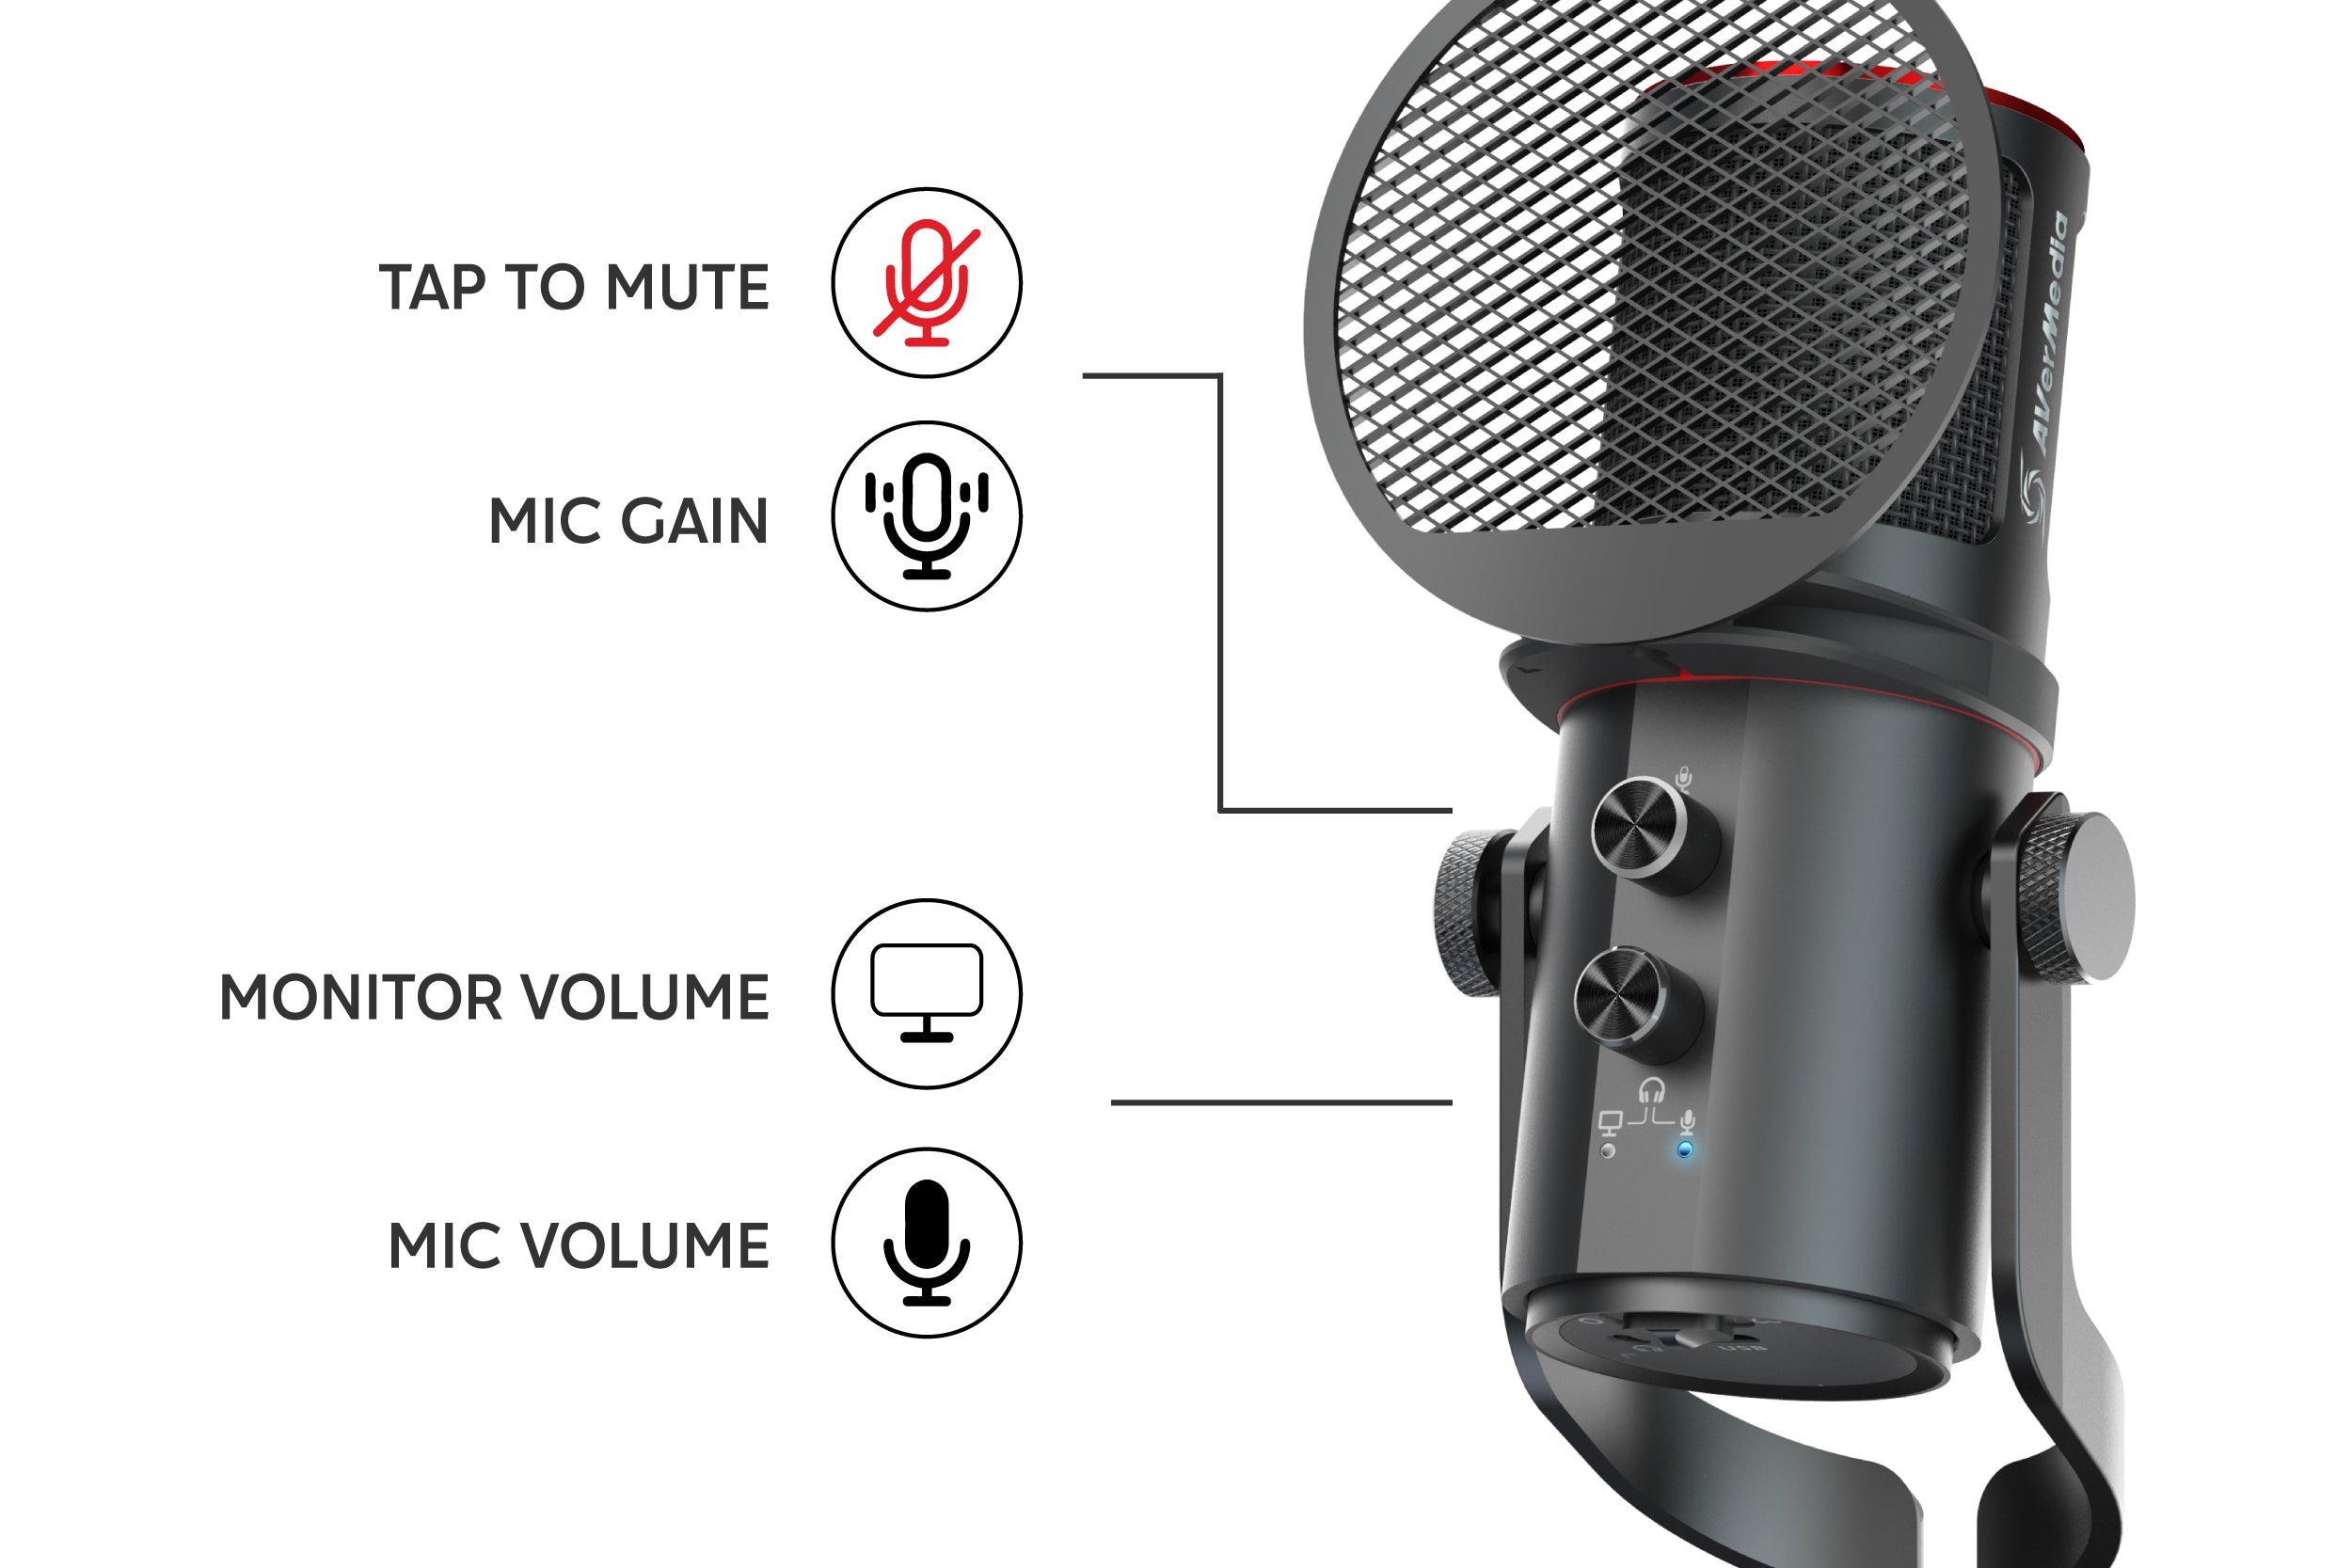 Limited Edition] AVerMedia AM350 Live Streamer Microphone Kit